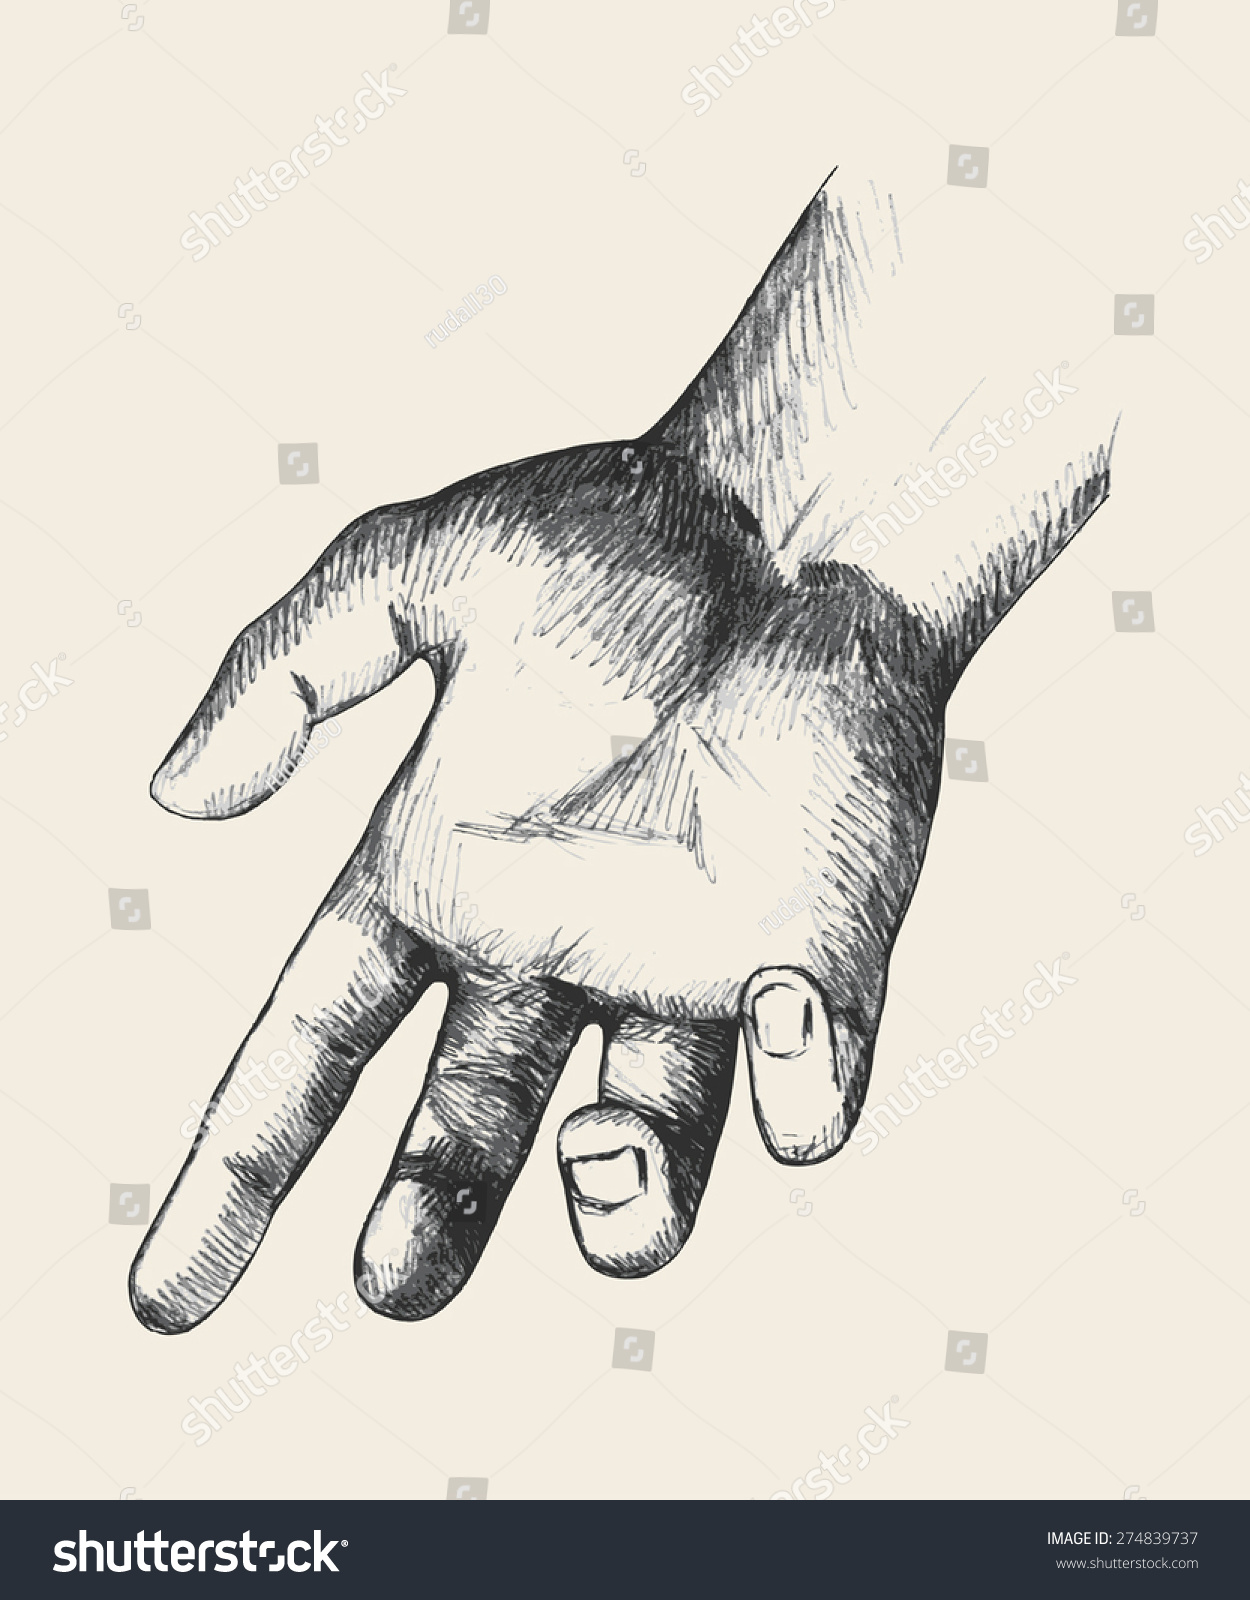 Sketch Illustration Of A Reaching Hand - 274839737 : Shutterstock